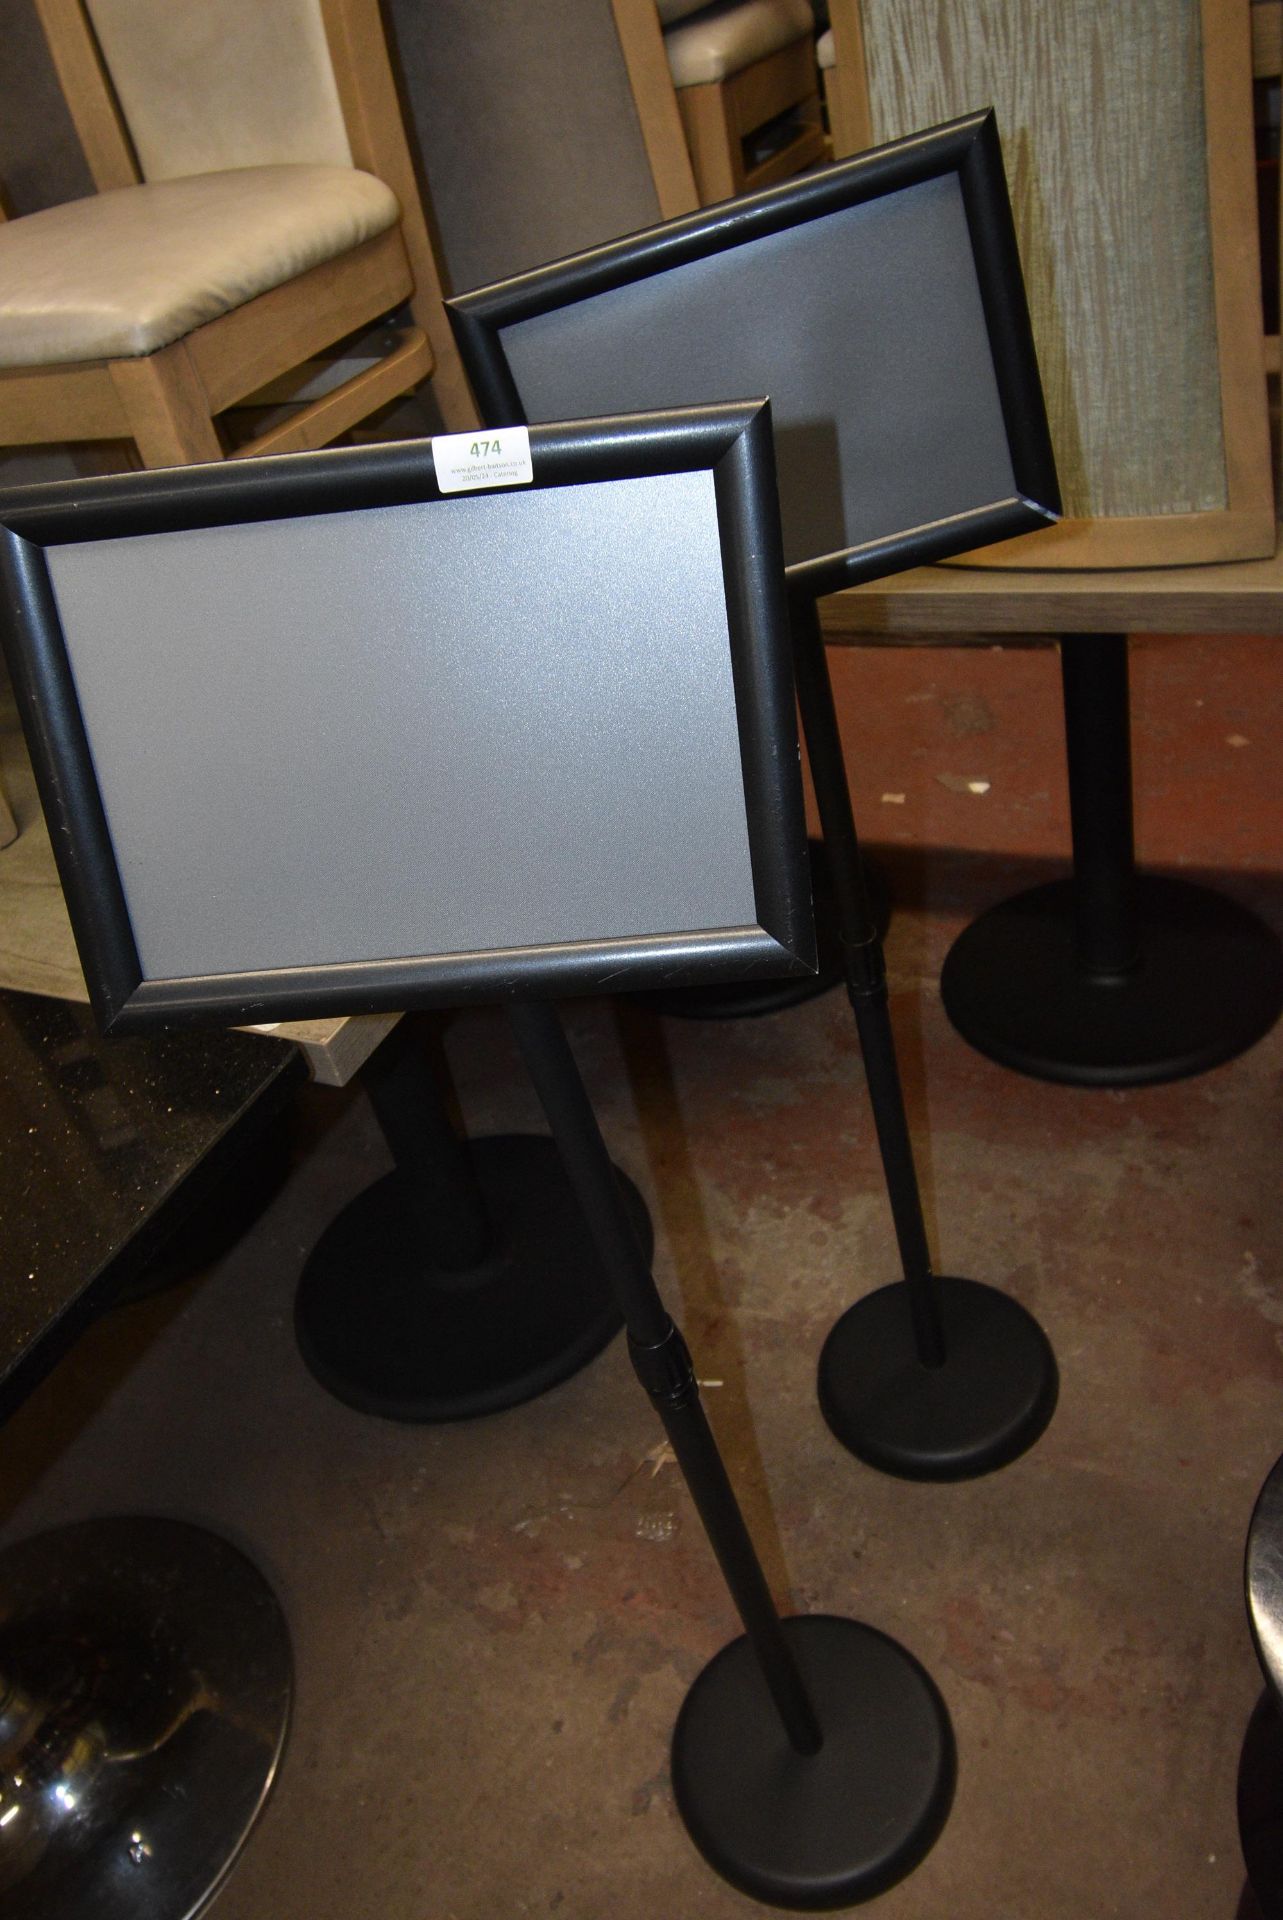 Two Upright Menu Display Stands